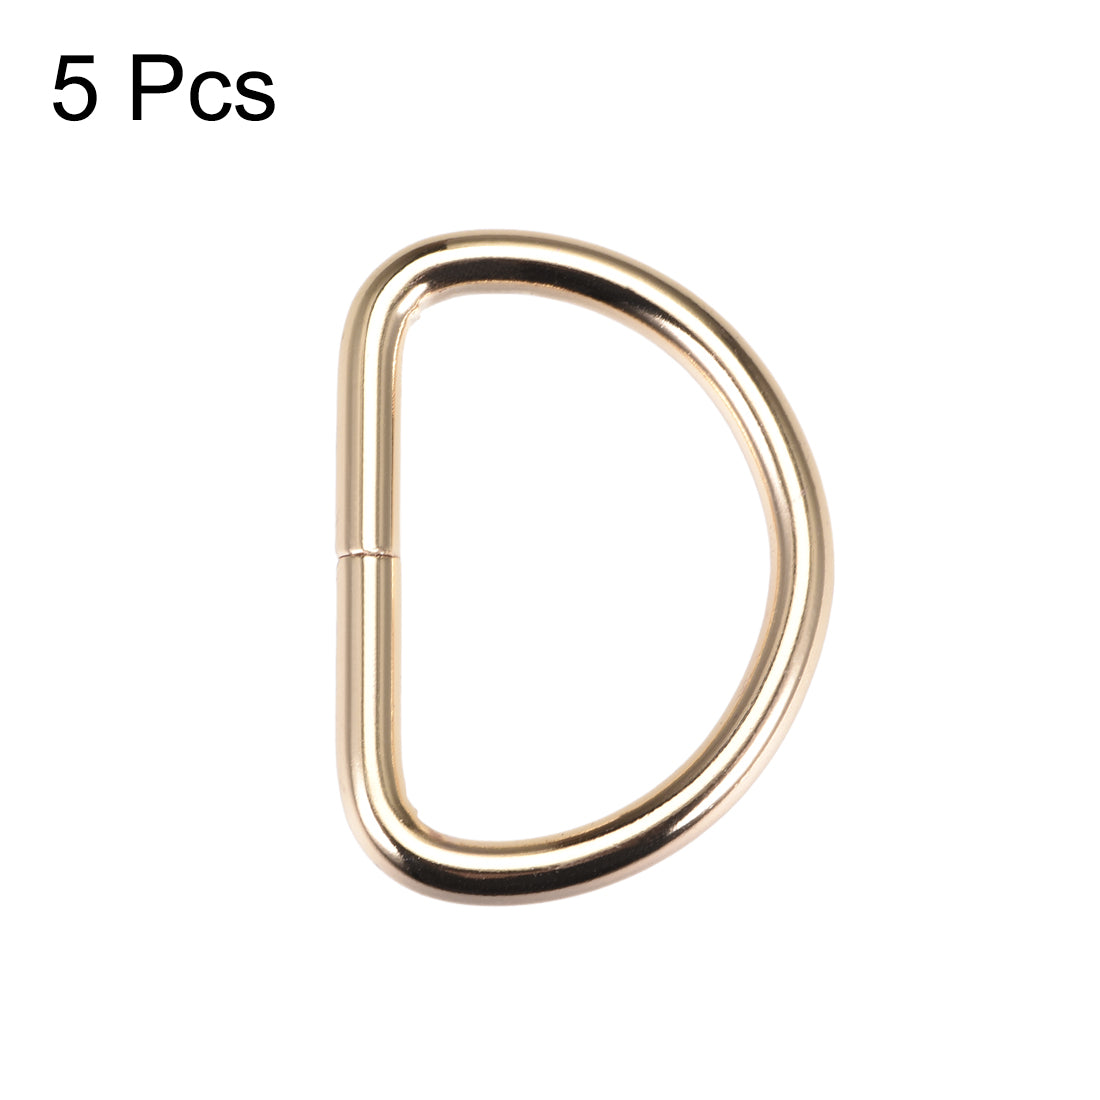 uxcell Uxcell 5 Pcs D Ring Buckle 1.6 Inch Metal Semi-Circular D-Rings Gold Tone for Hardware Bags Belts Craft DIY Accessories